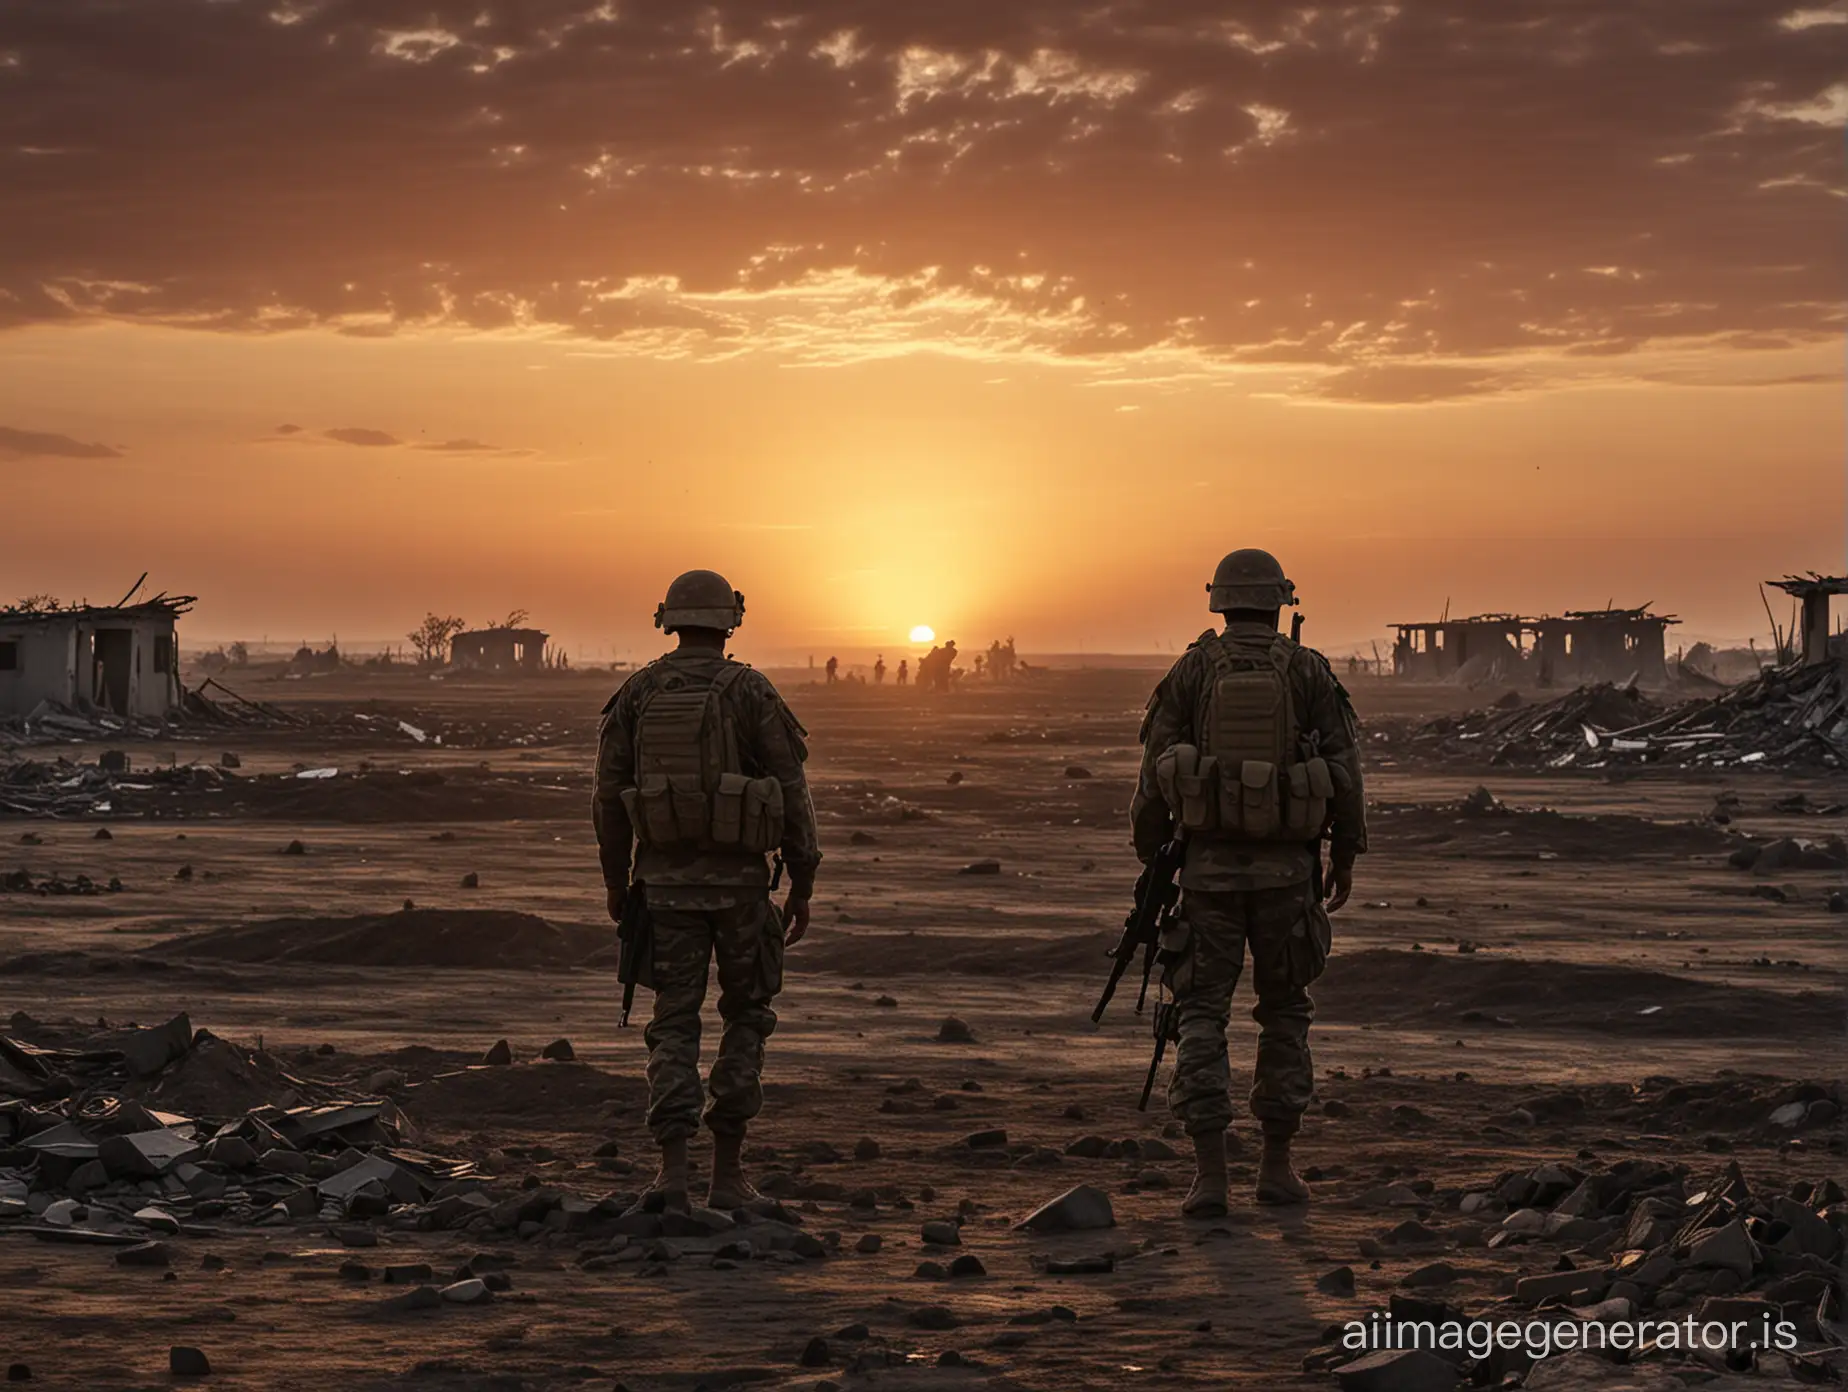 Soldiers stand against the sunset with their backs to the observer, in the distance stretches an endless field and destroyed houses, the picture is darkened